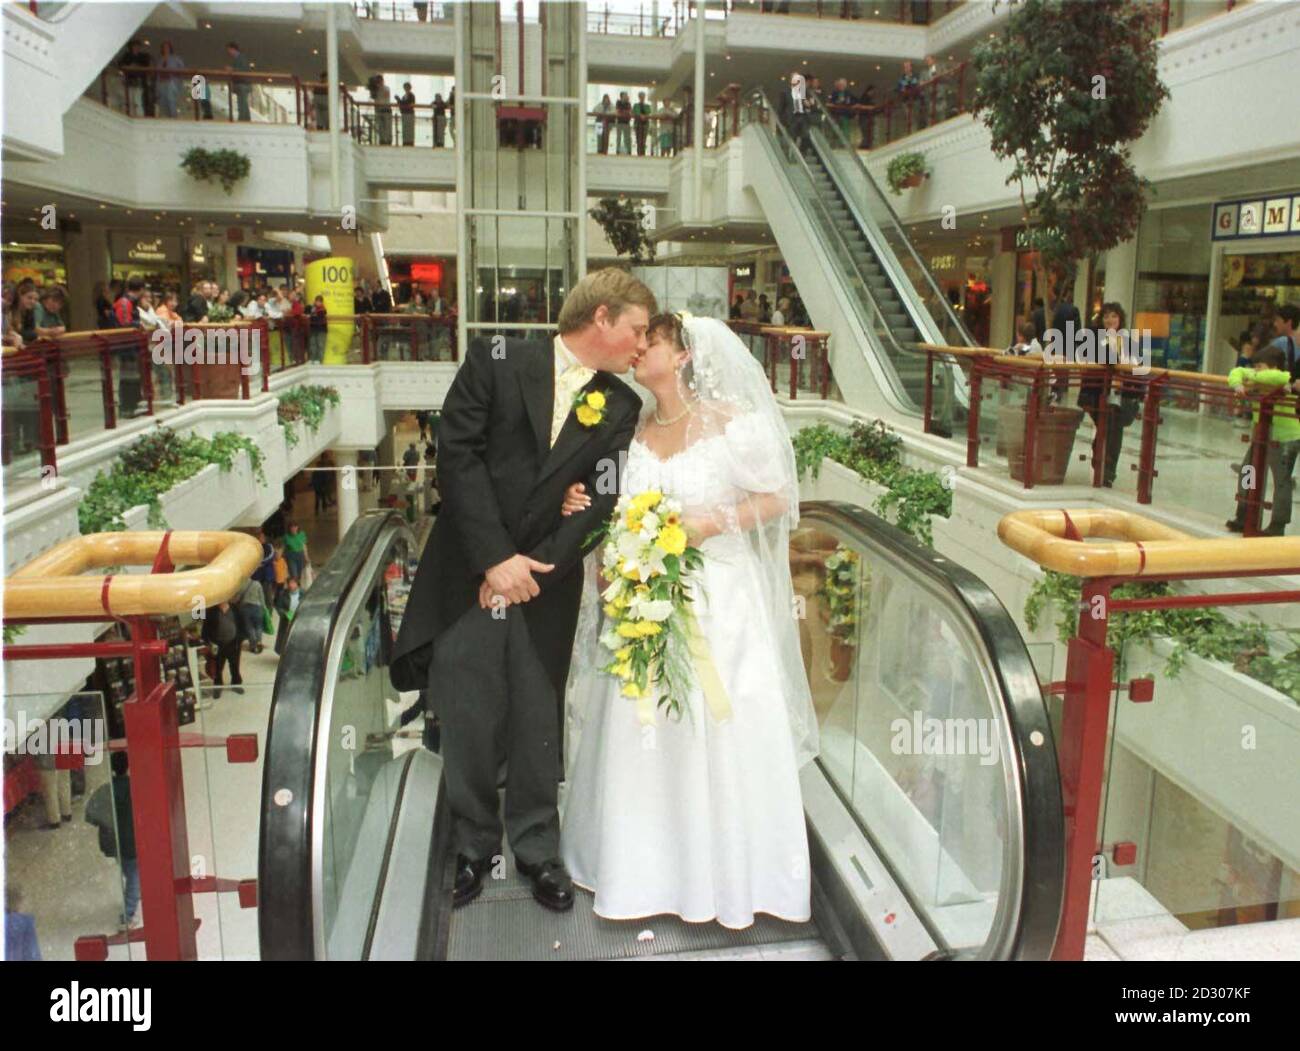 Britains first ever marriage in a shopping mall took place in Redhill, Surrey with the wedding of Deborah Lane and Damian Clapp.The couple were married at the Belfry shopping centre which obtained a special licence to stage weddings.   * 22/01/02: A government White Paper was expected to unveil plans  for the biggest shake-up of civil weddings in nearly two centuries, suggesting that it is no longer the venue which is licensed for marriage, but the person conducting the ceremony. Stock Photo